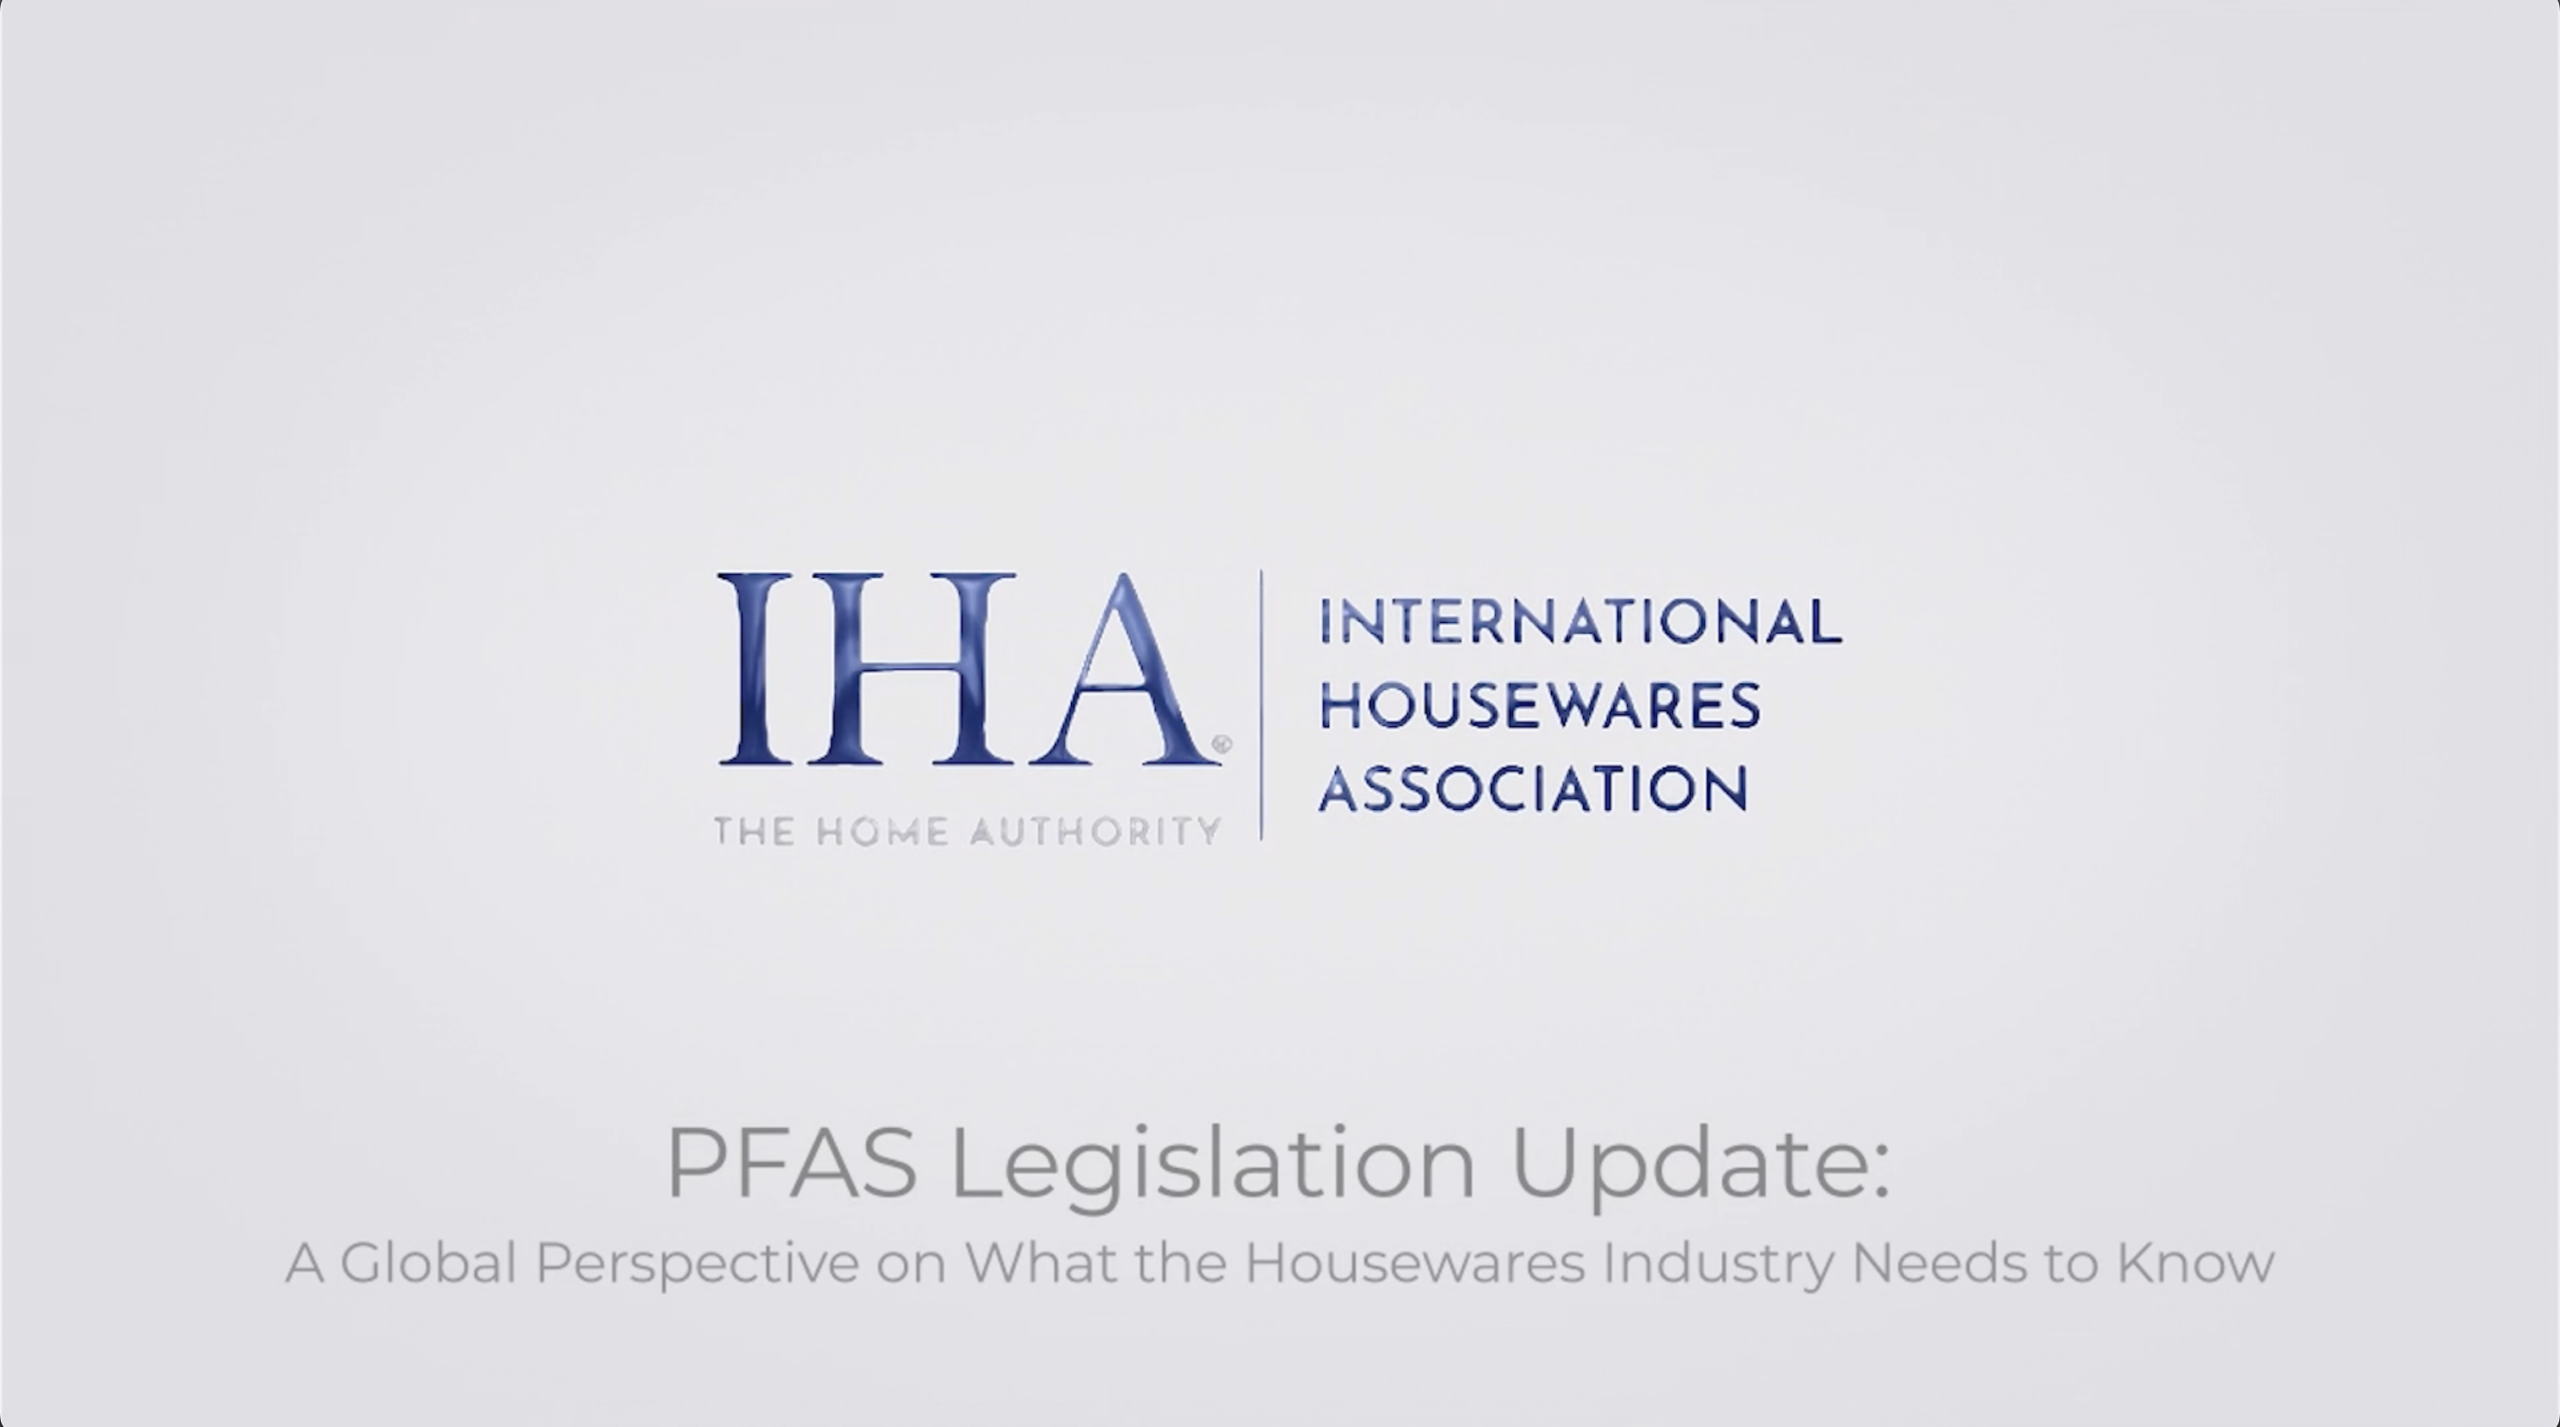 PFAS Legislation Update: A Global Perspective on What the Housewares Industry Needs to Know